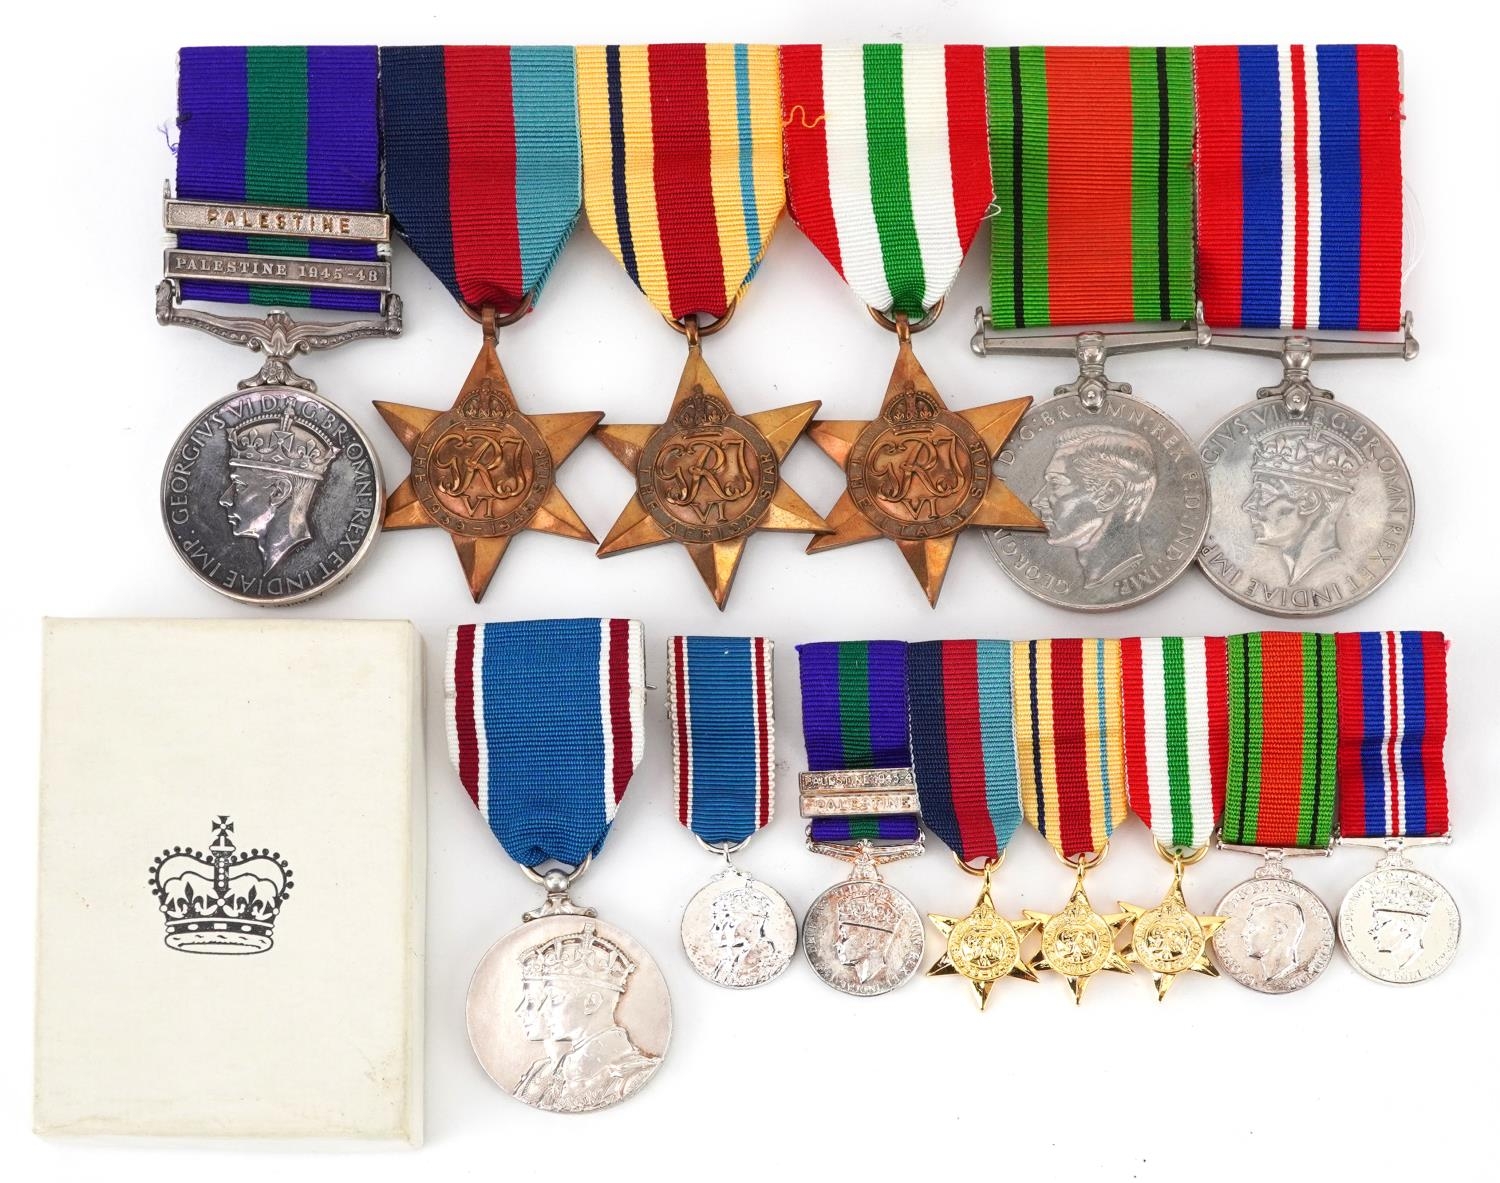 British military World War II seven medal group with dress medals including General Service medal